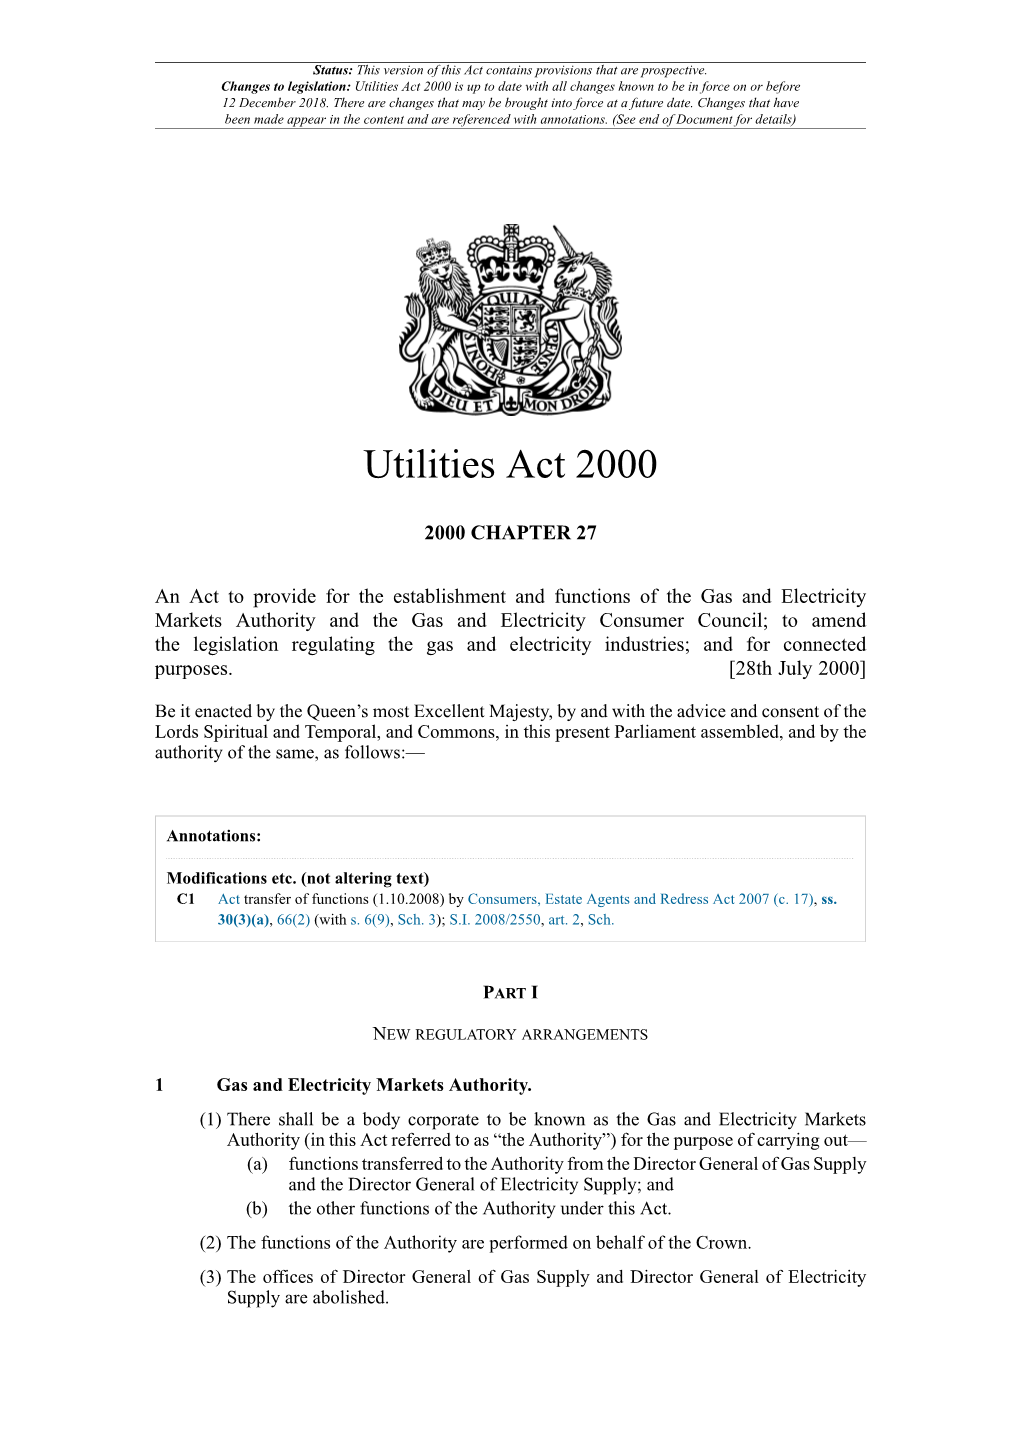 Utilities Act 2000 Is up to Date with All Changes Known to Be in Force on Or Before 12 December 2018